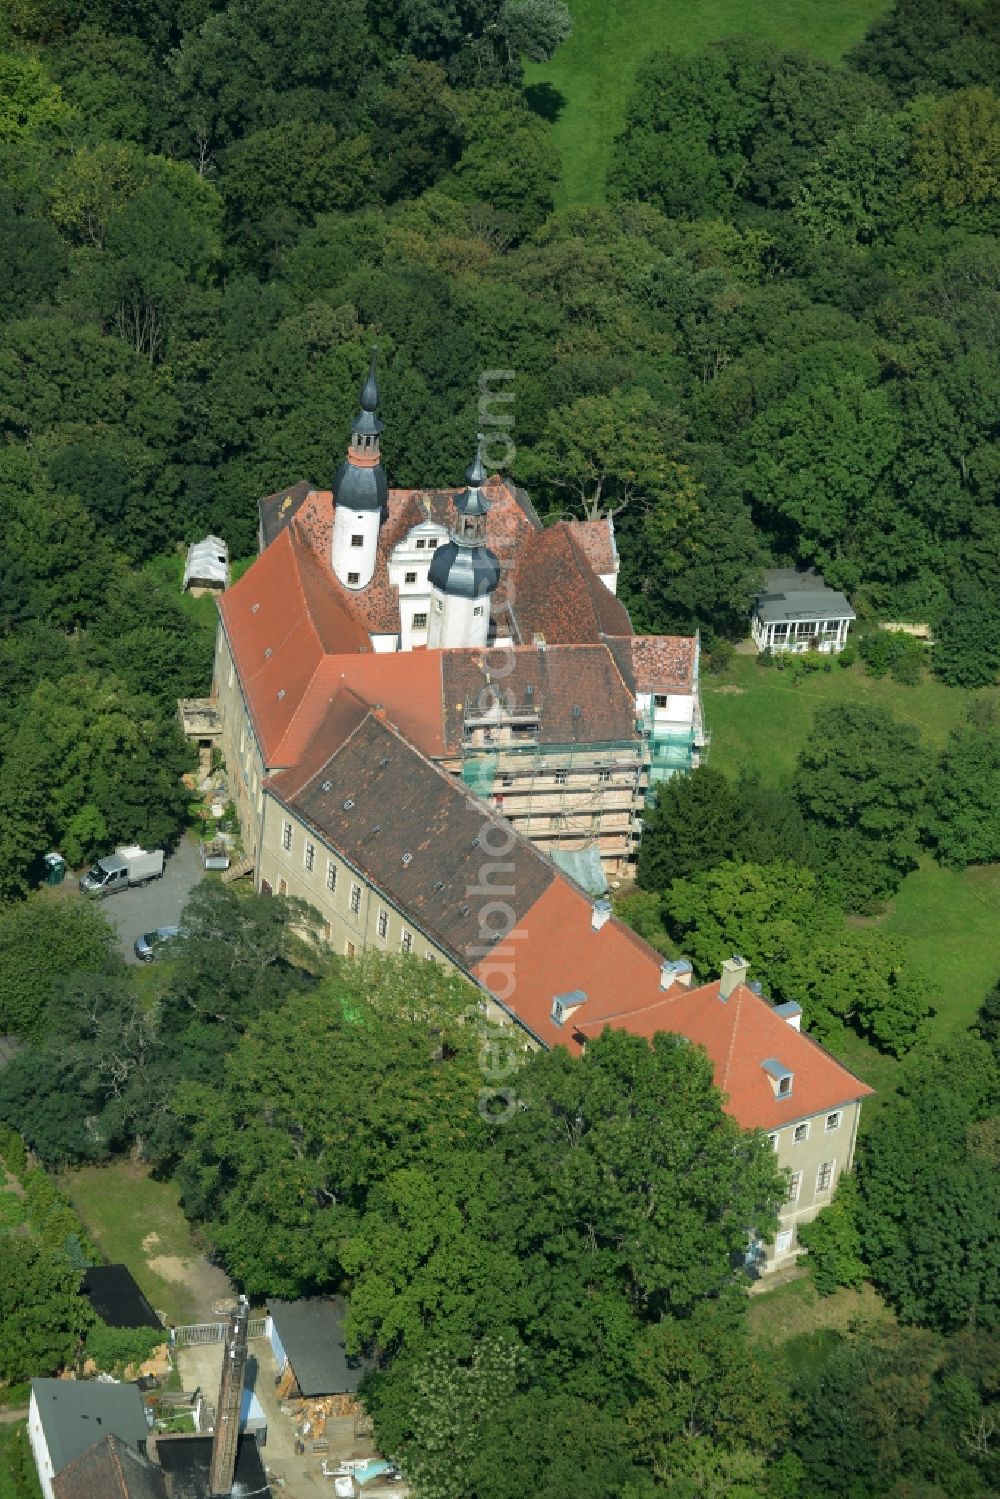 Zschepplin from the bird's eye view: Building and Park of Castle Zschepplin in Zschepplin in the state of Saxony. The castle with its church, yard and towers is located in a forest on the edge of Zschepplin